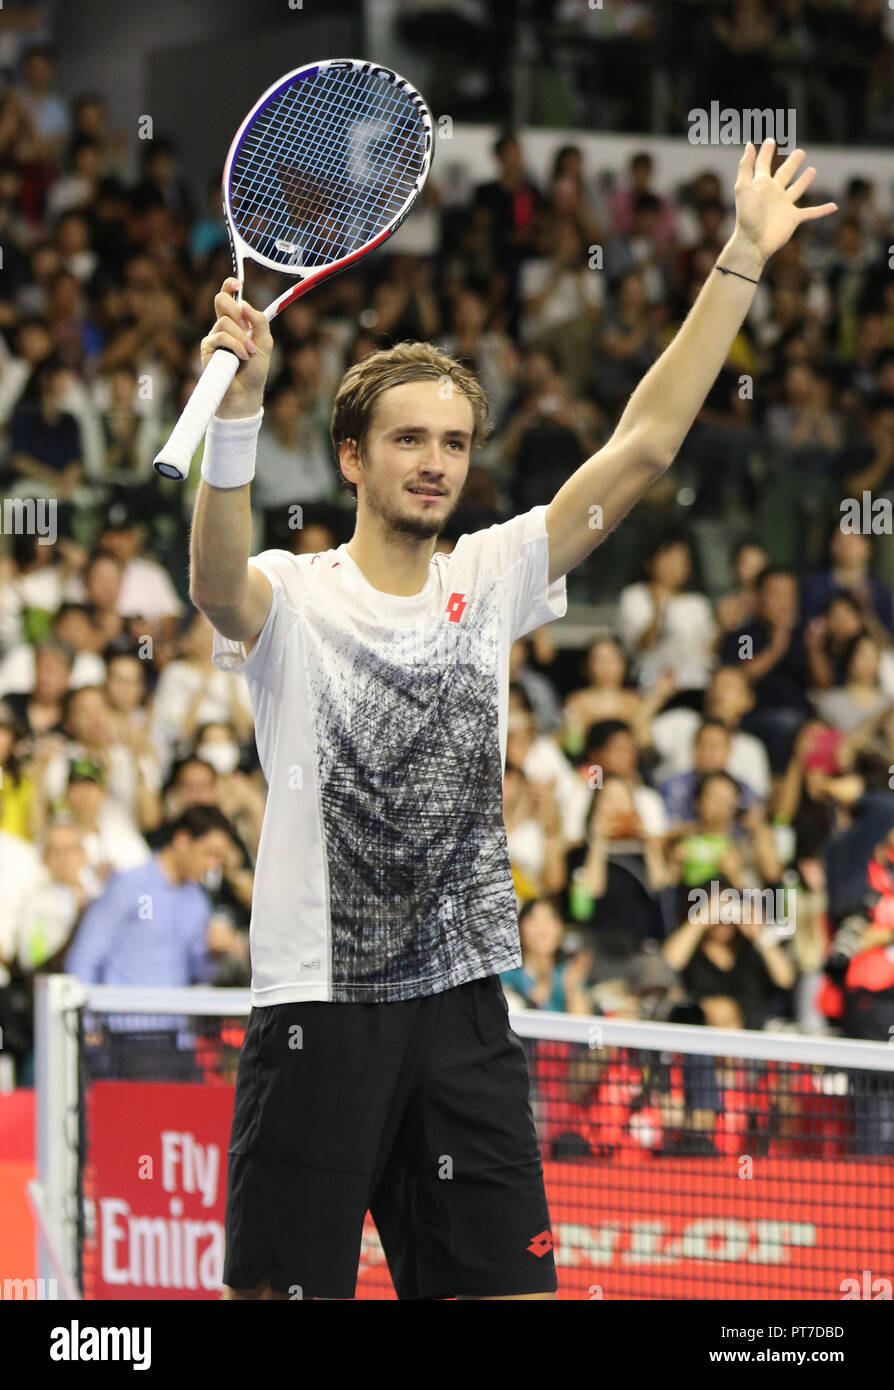 Tokyo, Japan. 6th Oct, 2018. Daniil Medvedev of Russia reacts to audience  after he won the Rakuten Japan Open tennis championships in Tokyo on  Sunday, October 7, 2018. Medvedev defeated Kei Nishikori